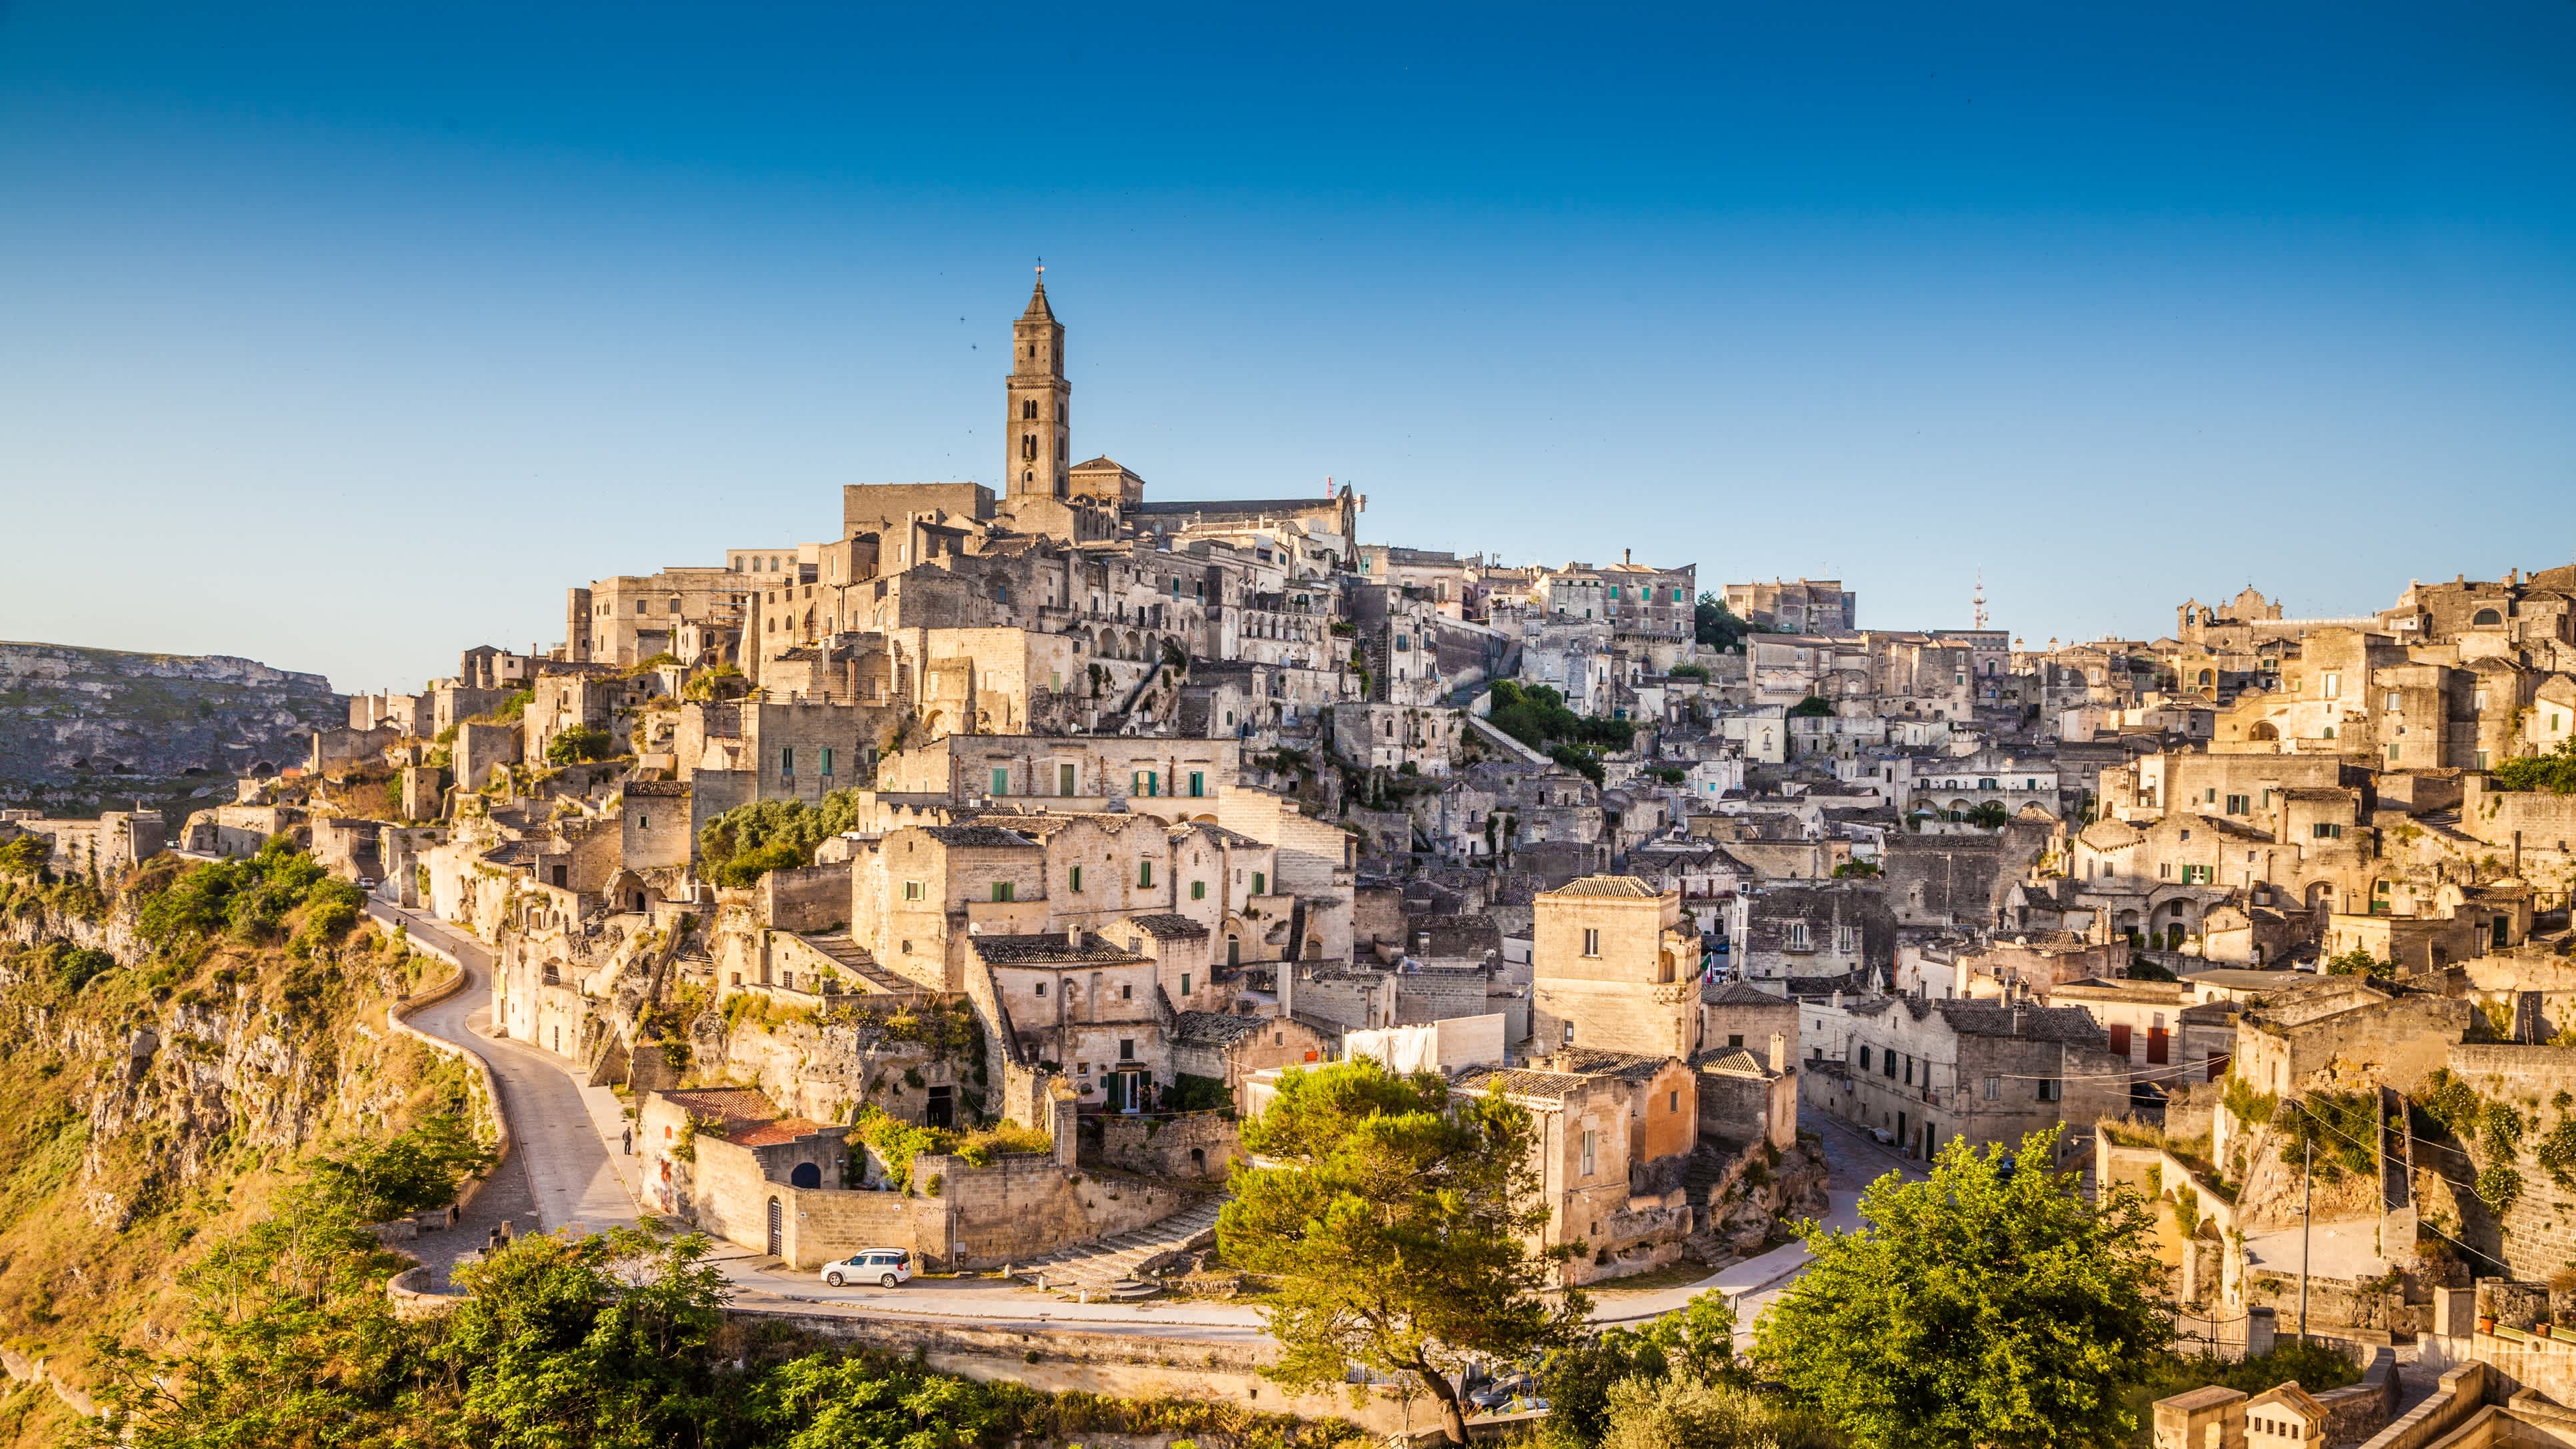 See the beautiful skyline of Matera on tour of Puglia